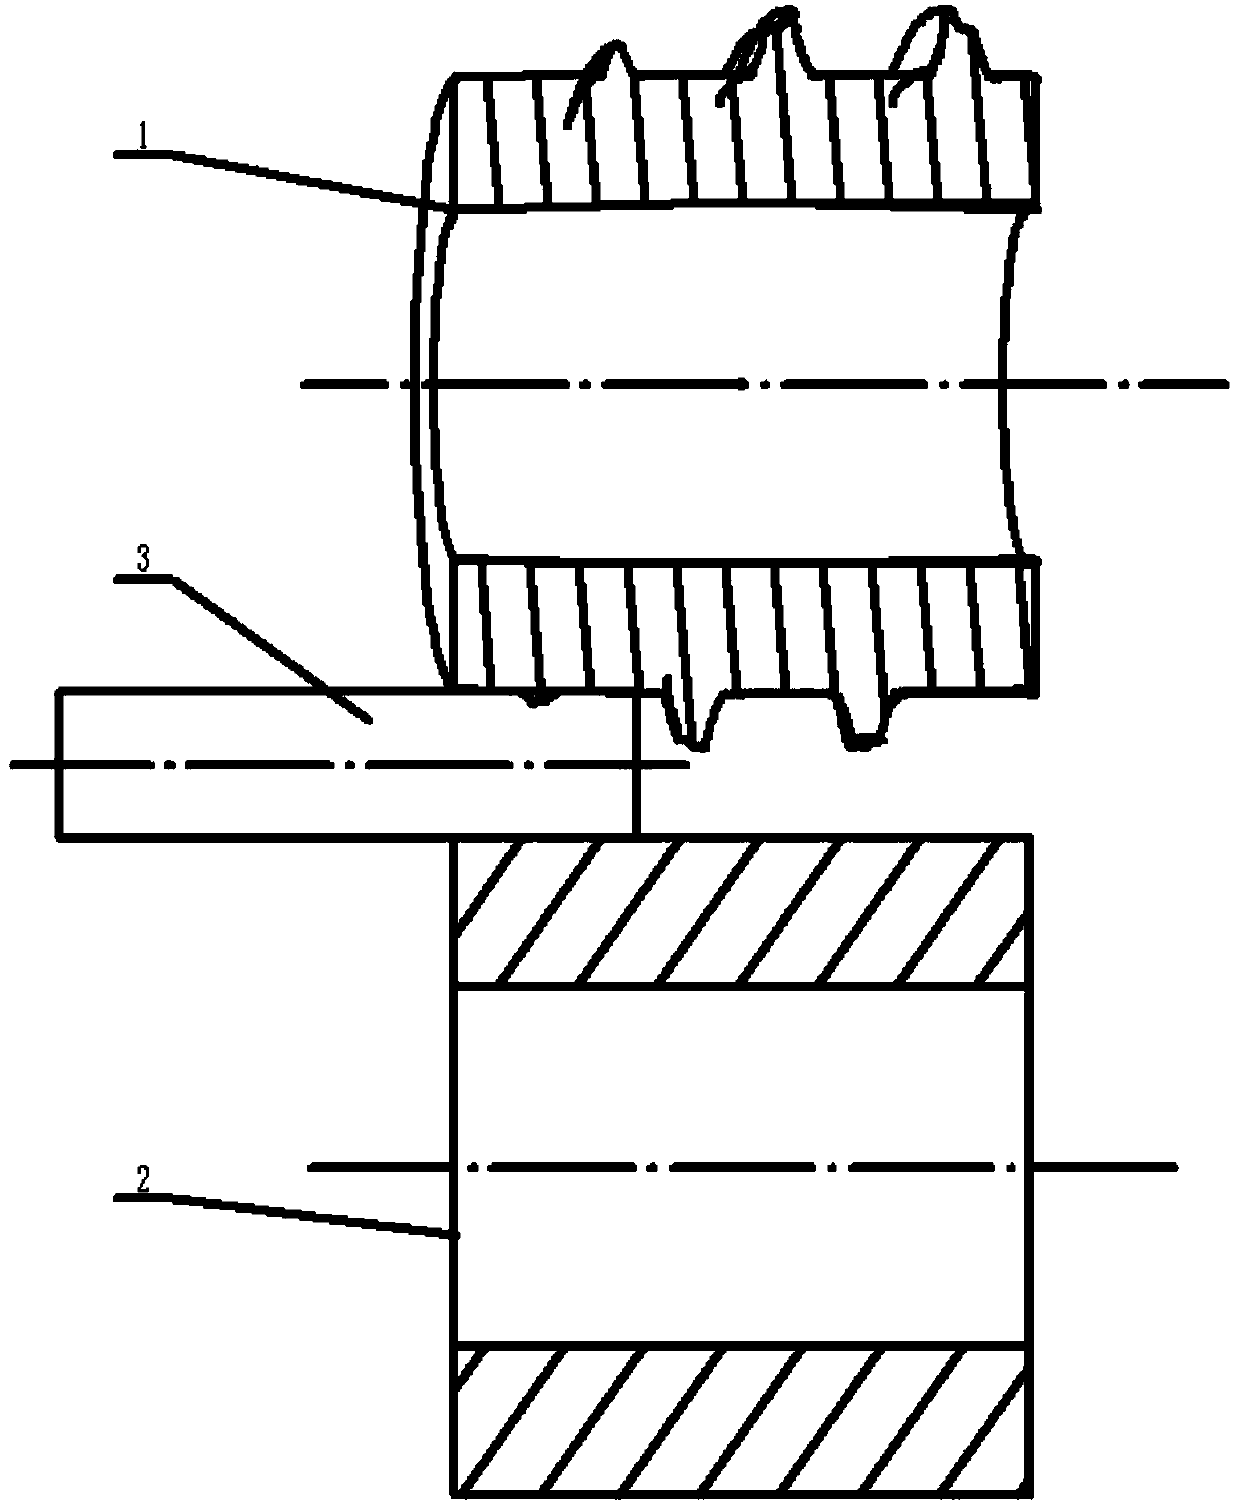 Efficient near-net forming method for single-port type oblique rolling ball-milled steel sections